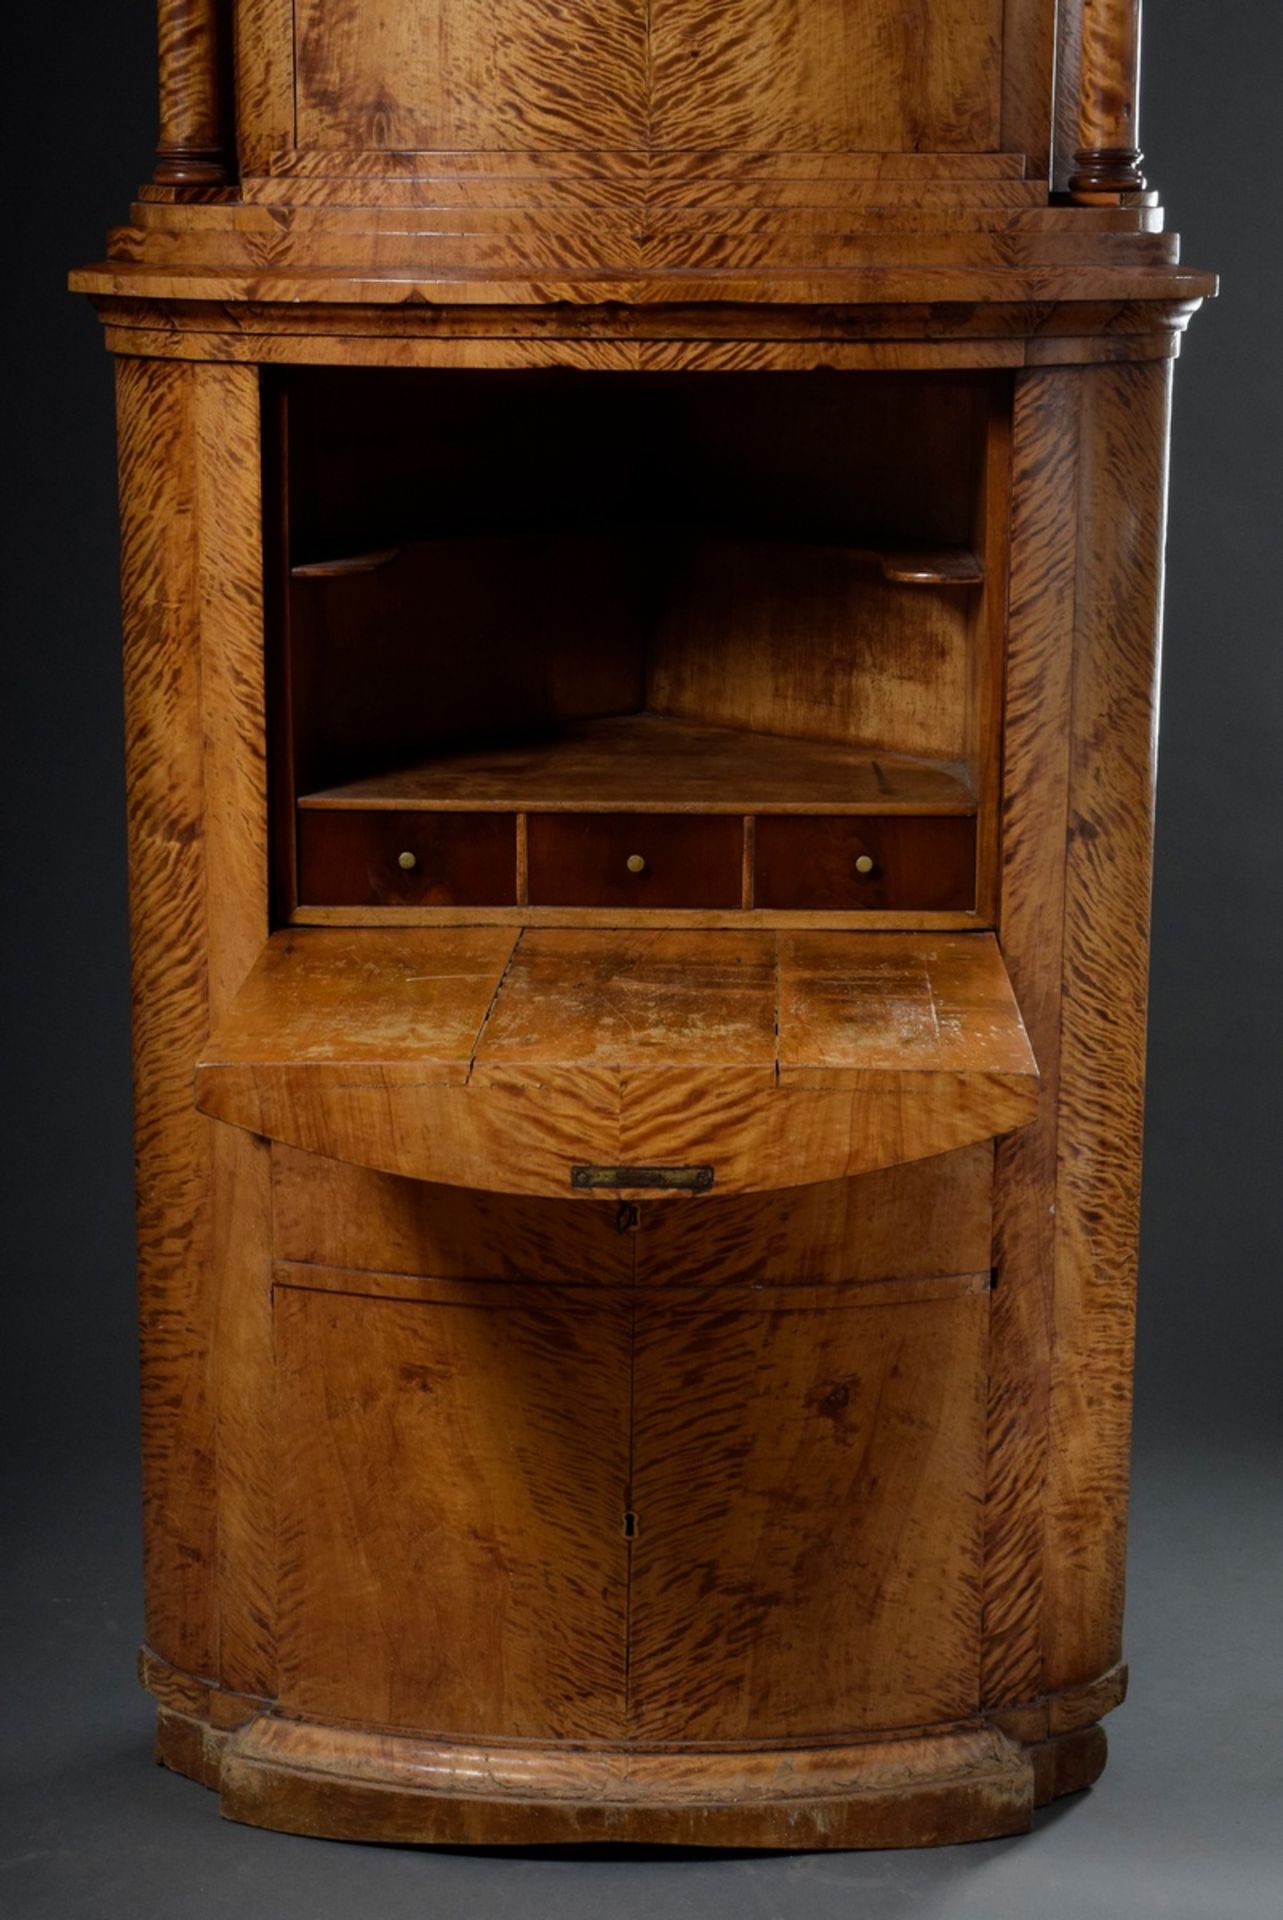 Imposing Empire corner writing cabinet with semi-circular front and lateral full columns in the top - Image 8 of 14